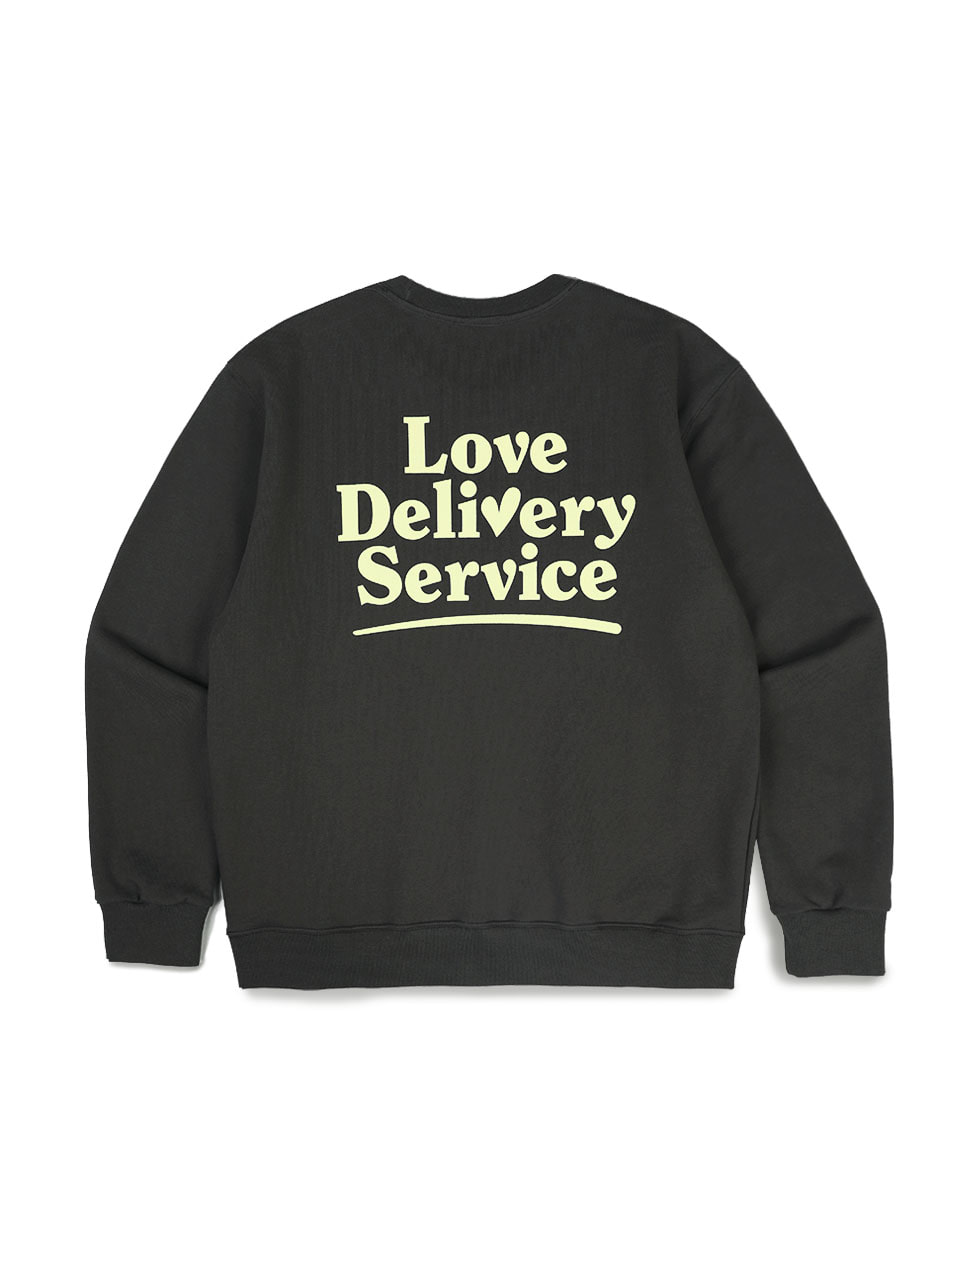 Love delivery service Sweatshirt charcoal